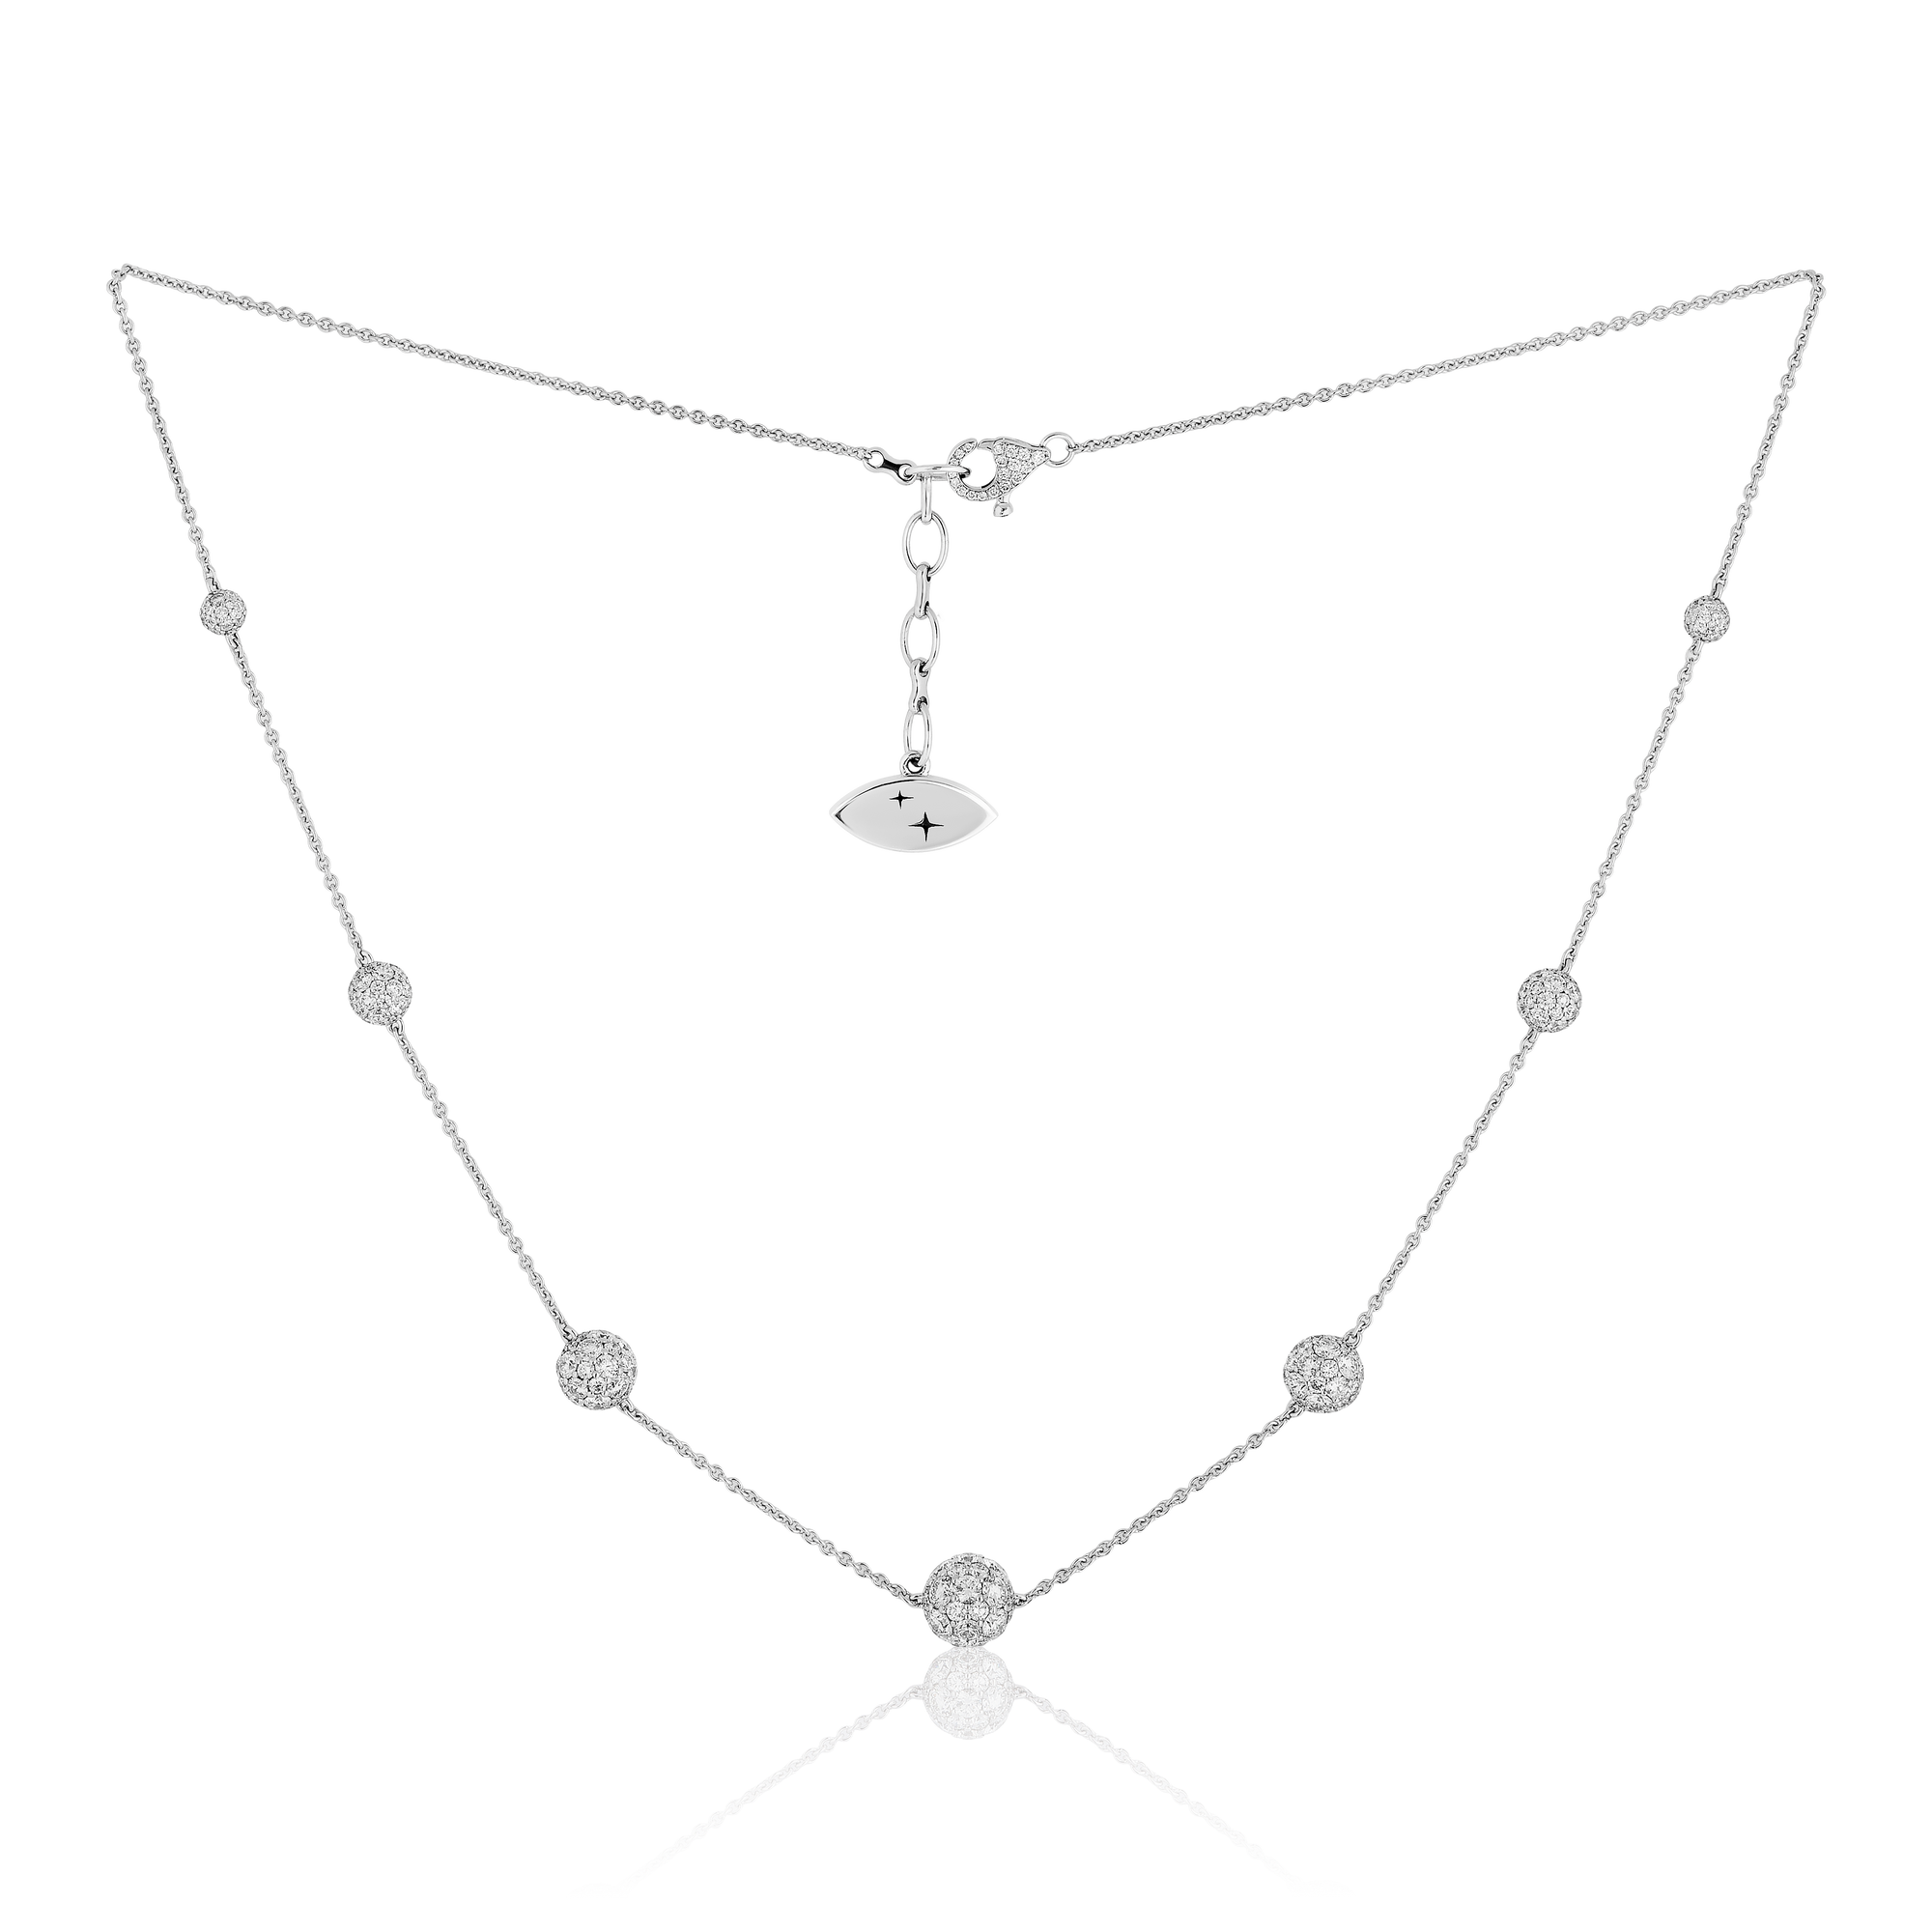 Celestial Graduating Charm Necklace with Standard Chain